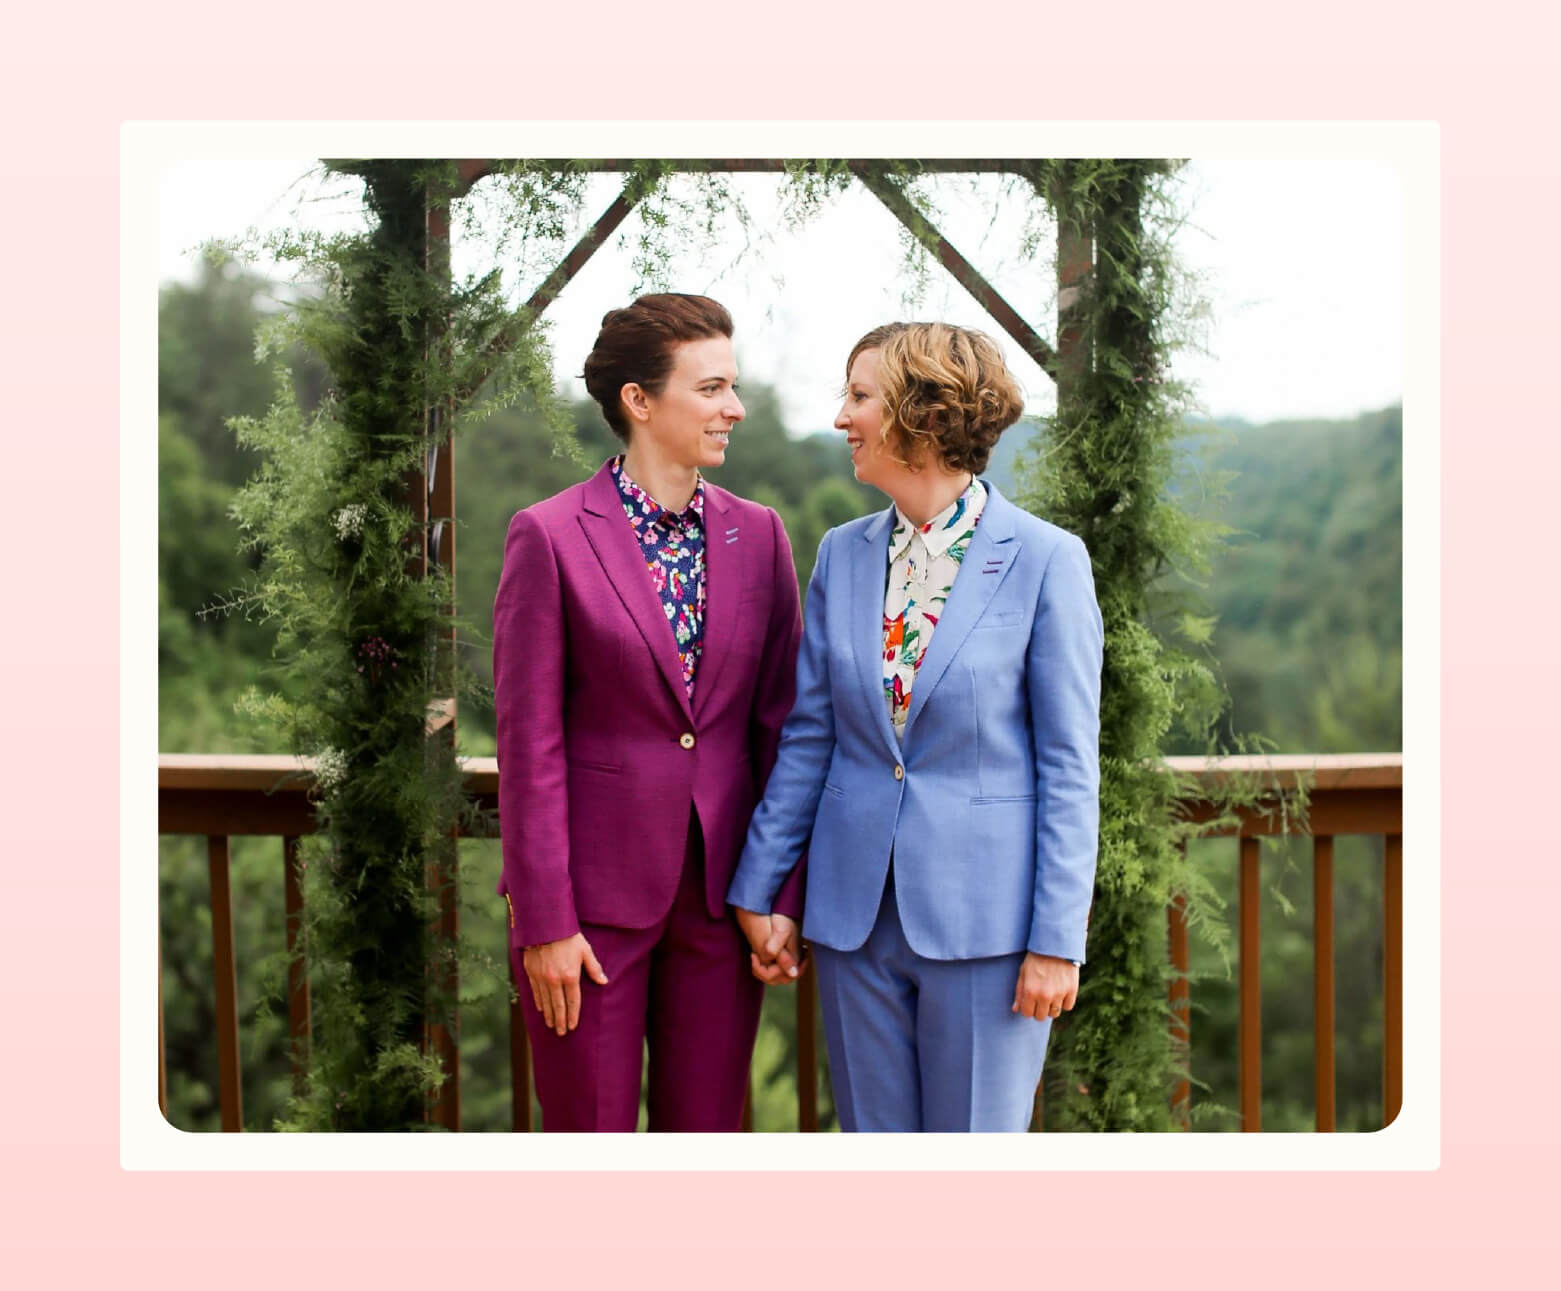 A couple in complimentary suits, one fuchsia and the other pale blue, from Sharpe Suiting holds hands and look at each other standing in front of greenery arch